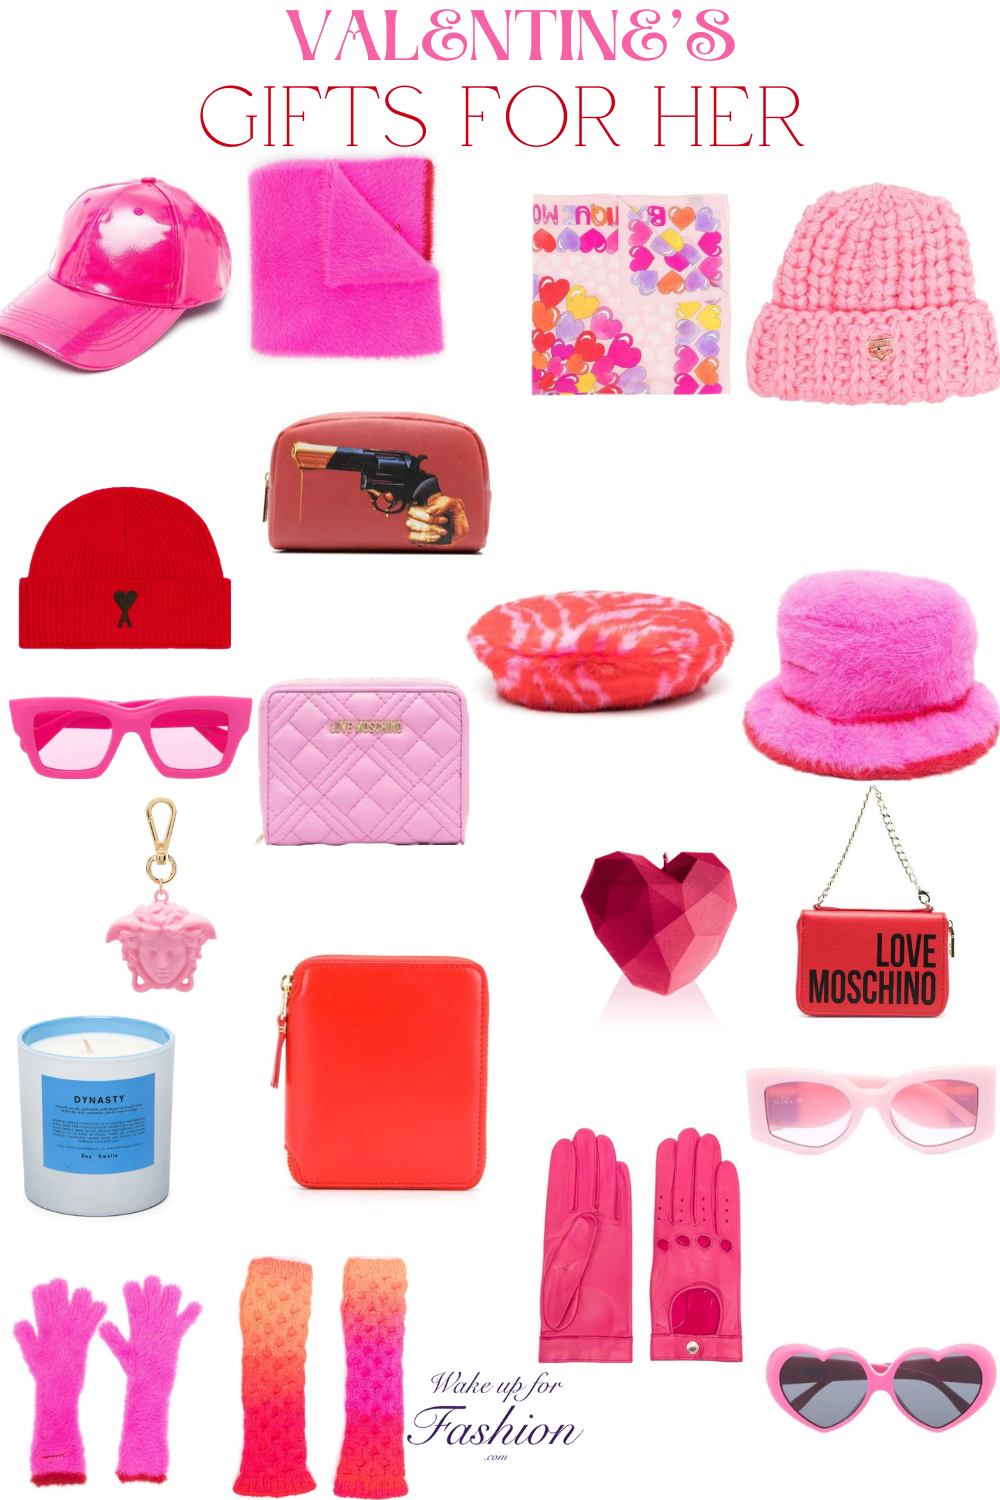 Collection of Valentine’s gift ideas for her